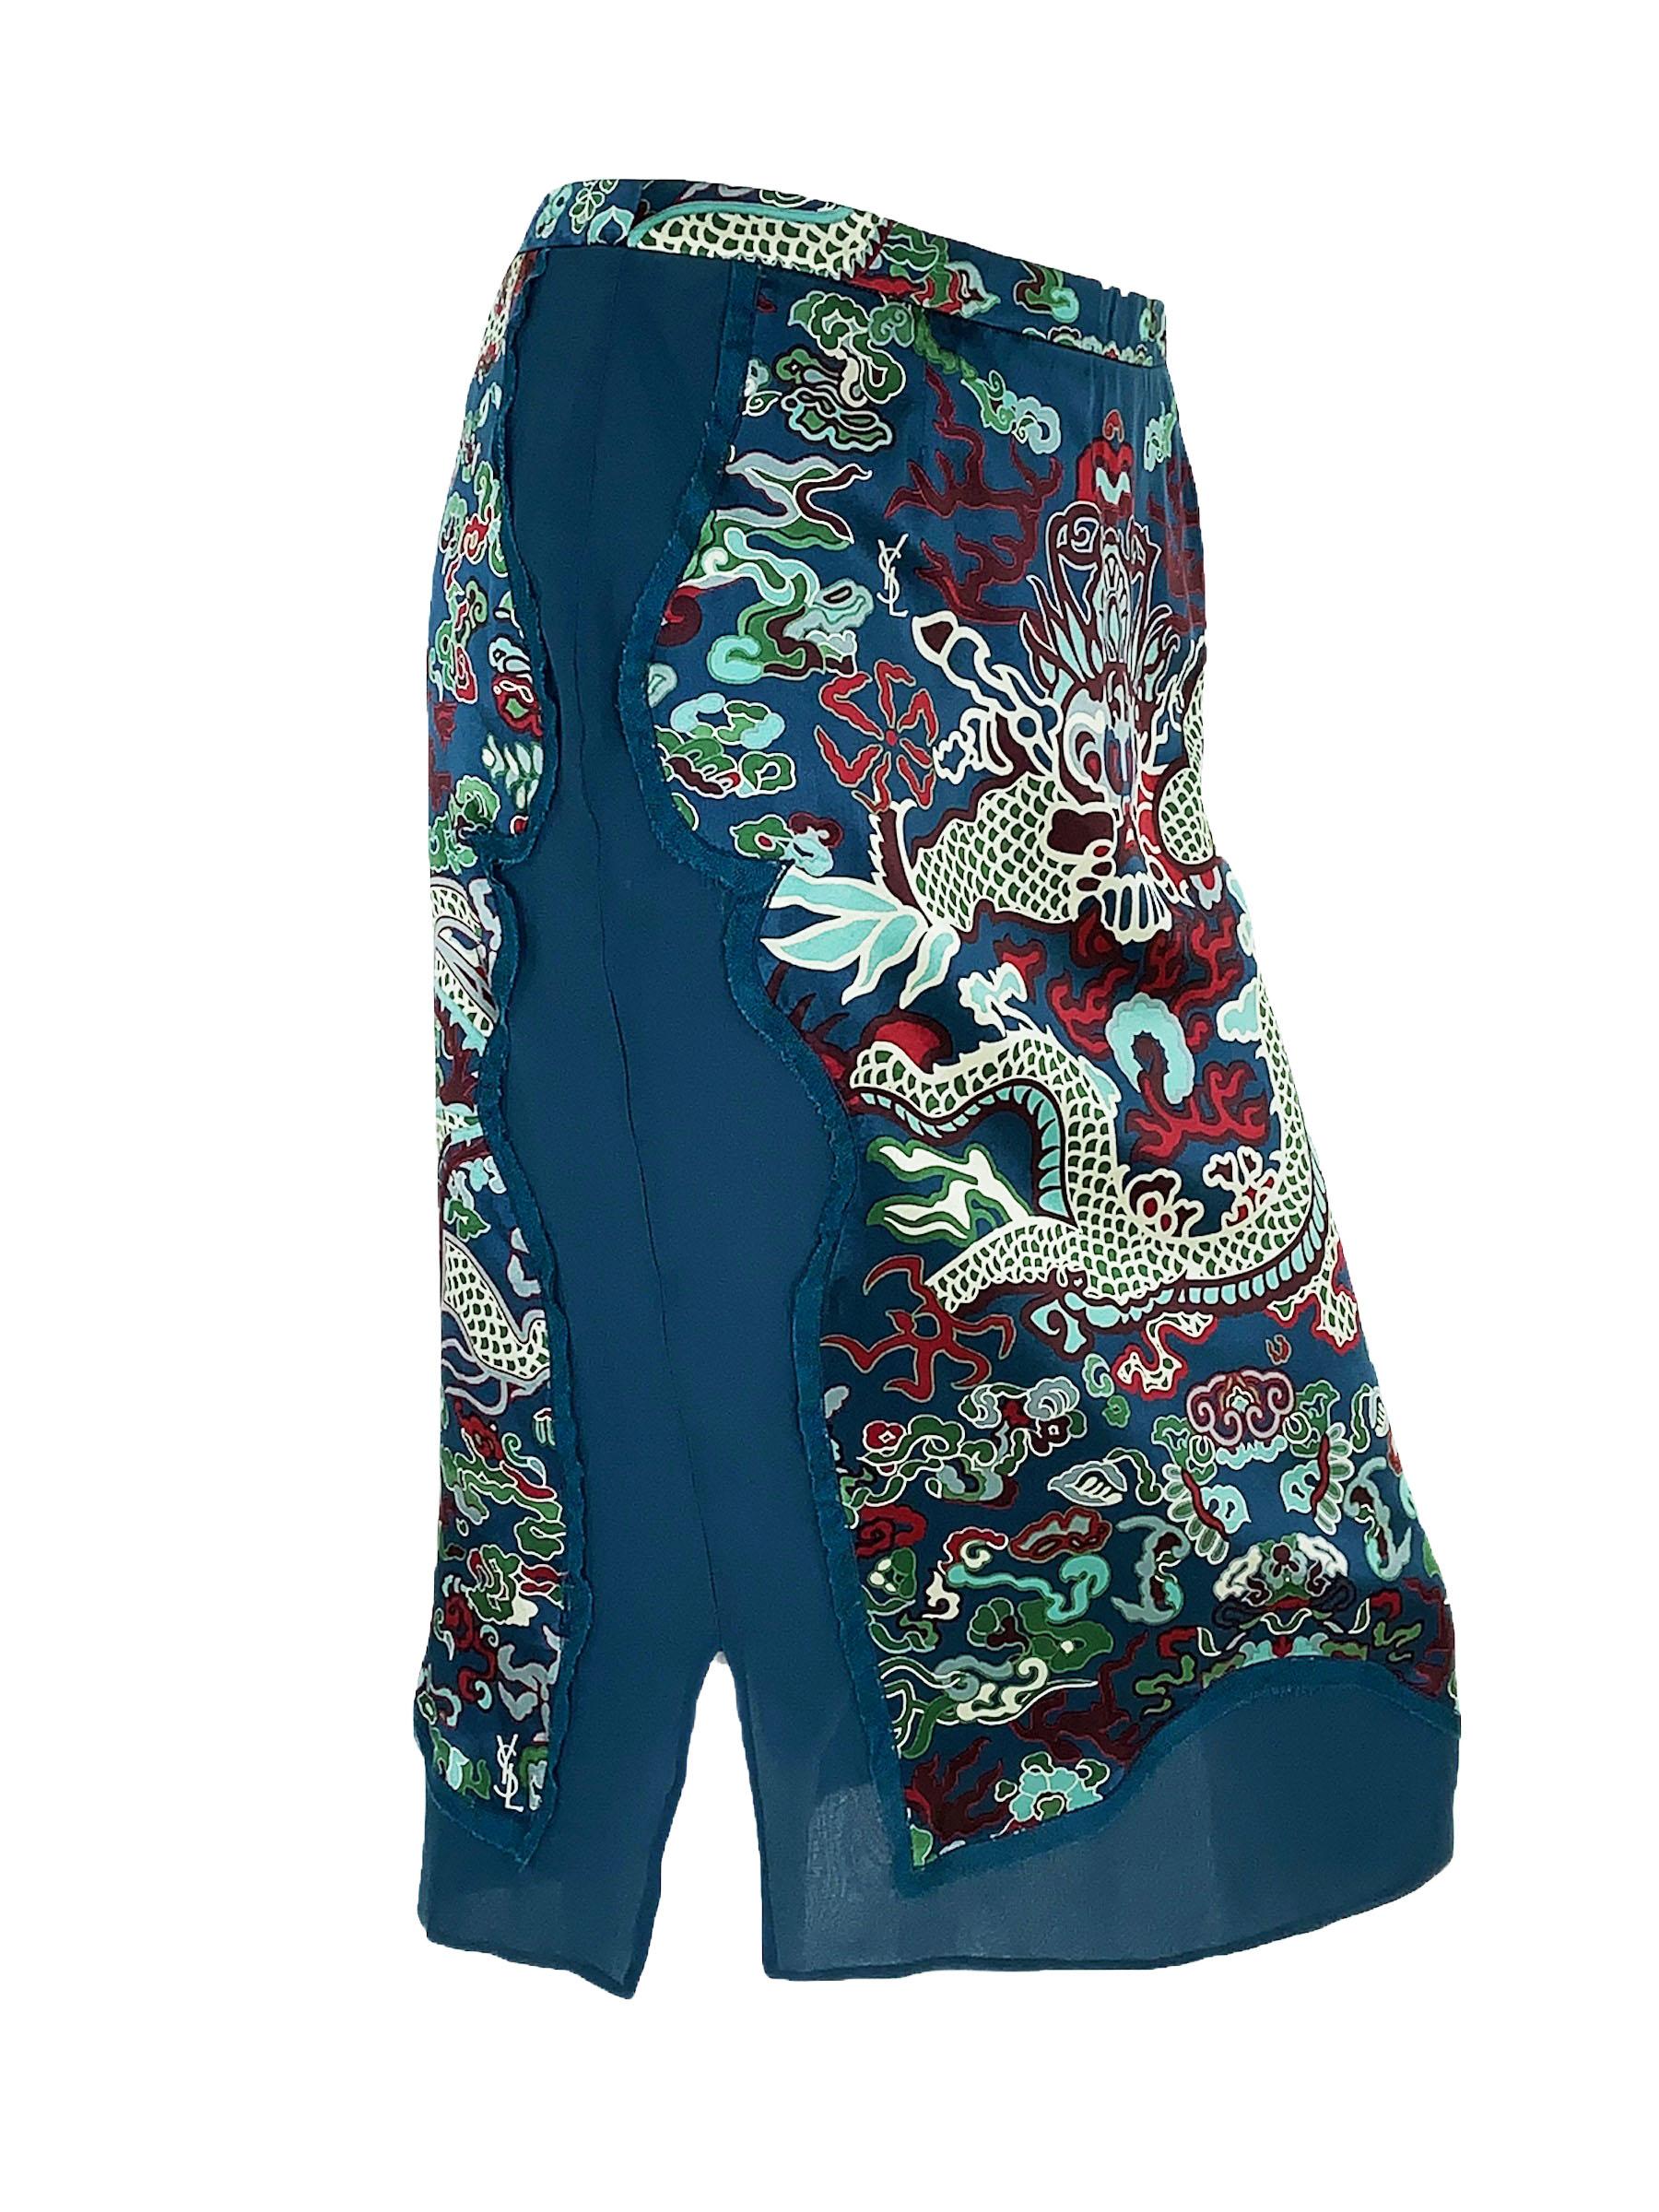 New Tom Ford for Yves Saint Laurent F/W 2004 Chinoiserie Collection ...